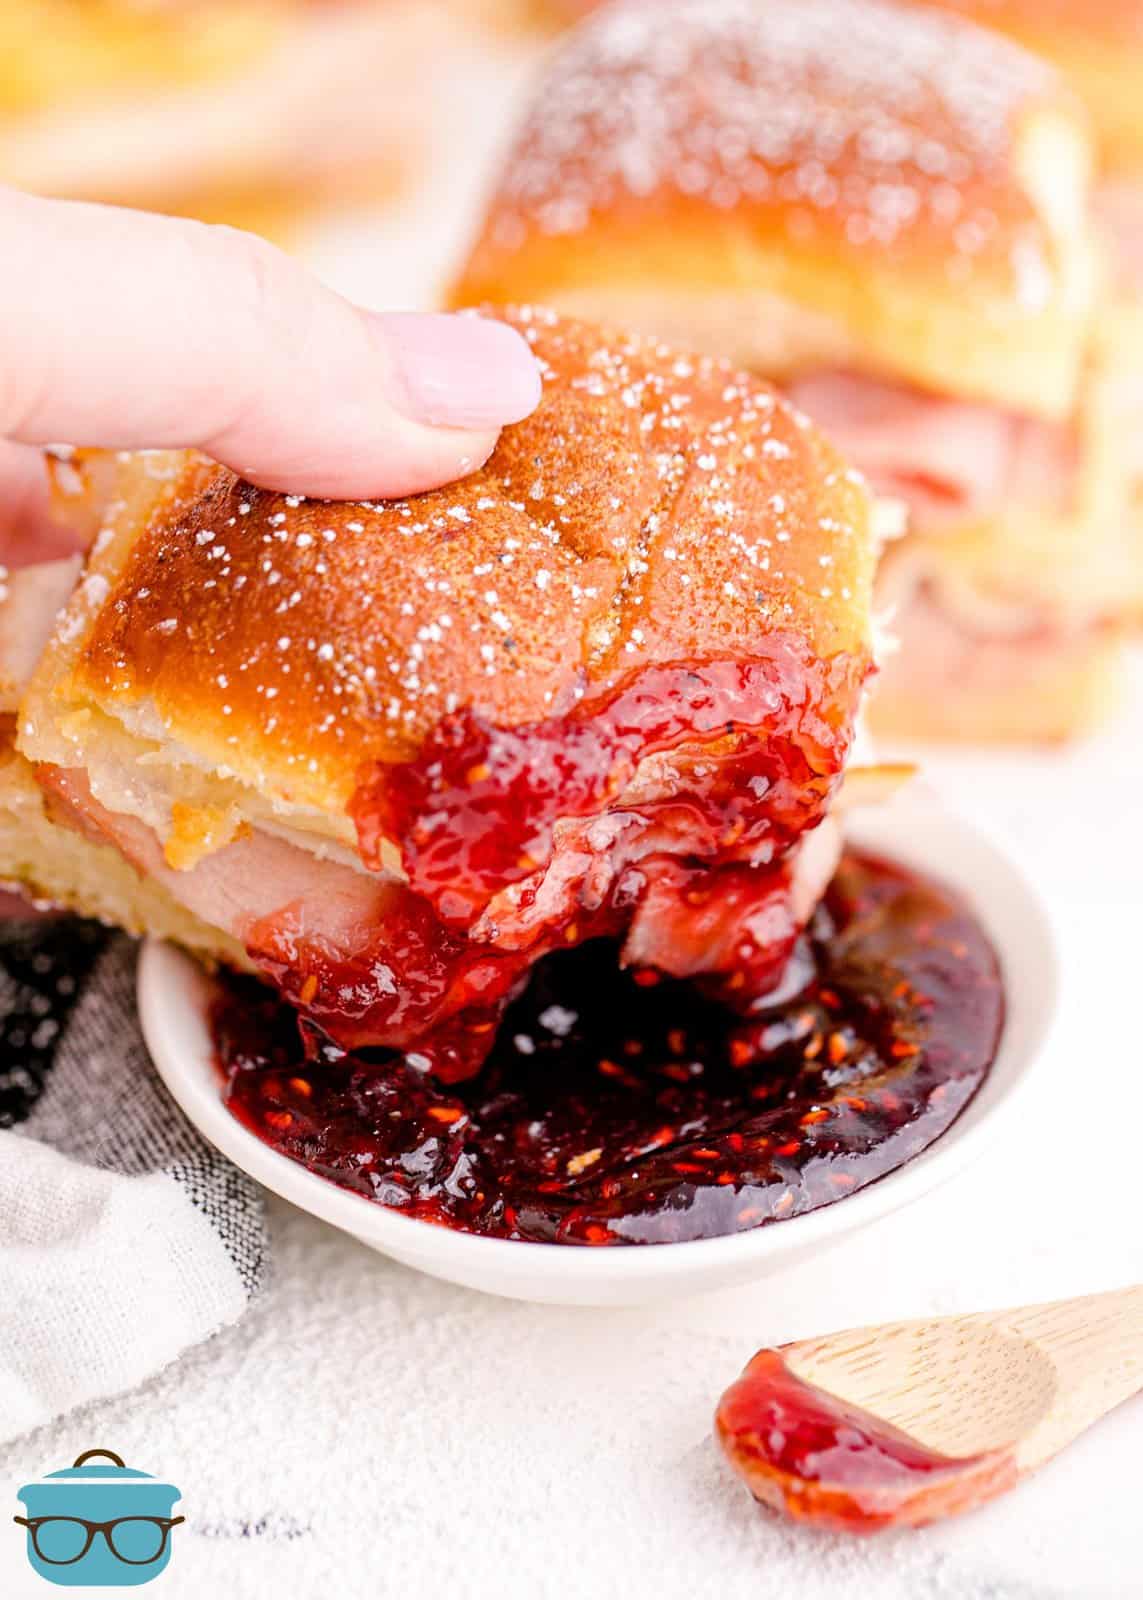 Hand dipping one of the Monte Cristo Sliders in the preserves.